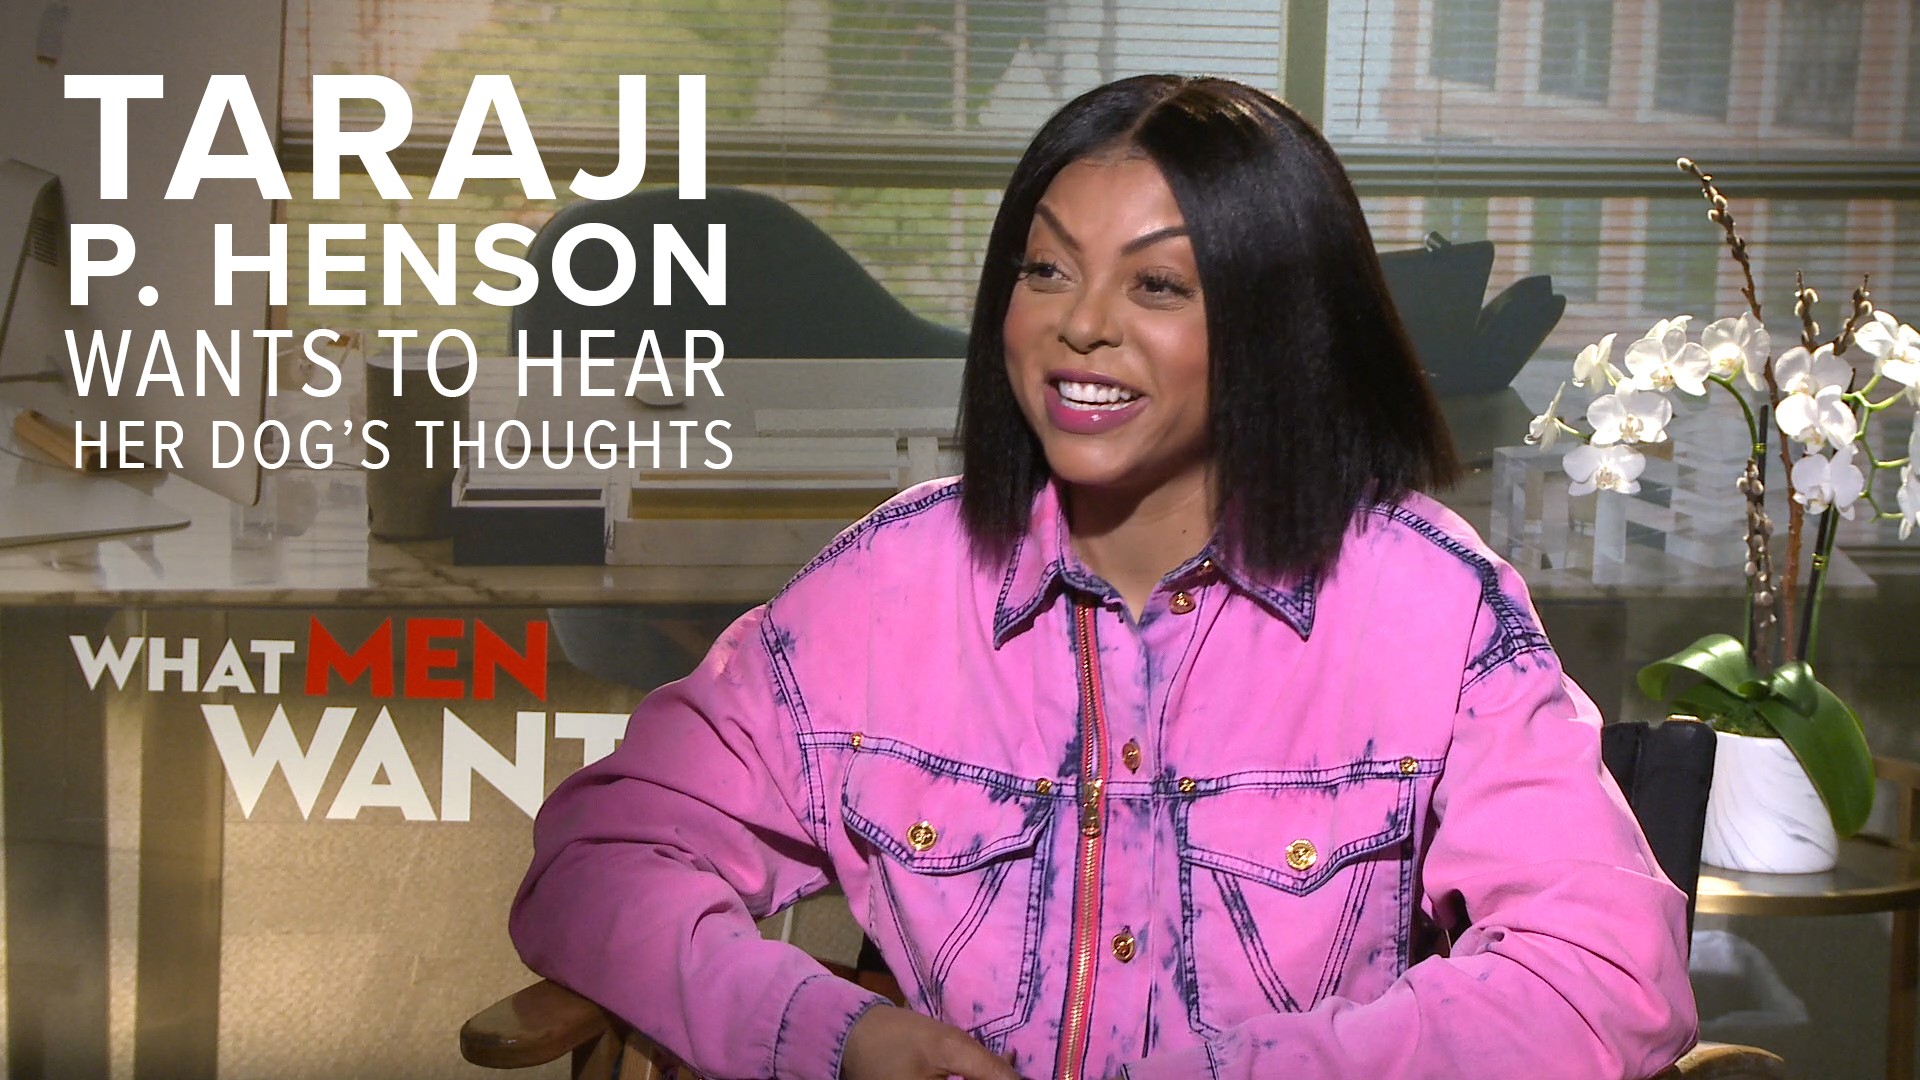 Taraji P. Henson sits down to talk about her new movie 'What Men Want.' She tells Mark S. Allen there are only three minds she would want to be able to read... her fiance, son, and dog. Mark also asks her about 'Empire' and if she (or Cookie) knows who's in the casket. Interview arranged by Paramount Pictures.